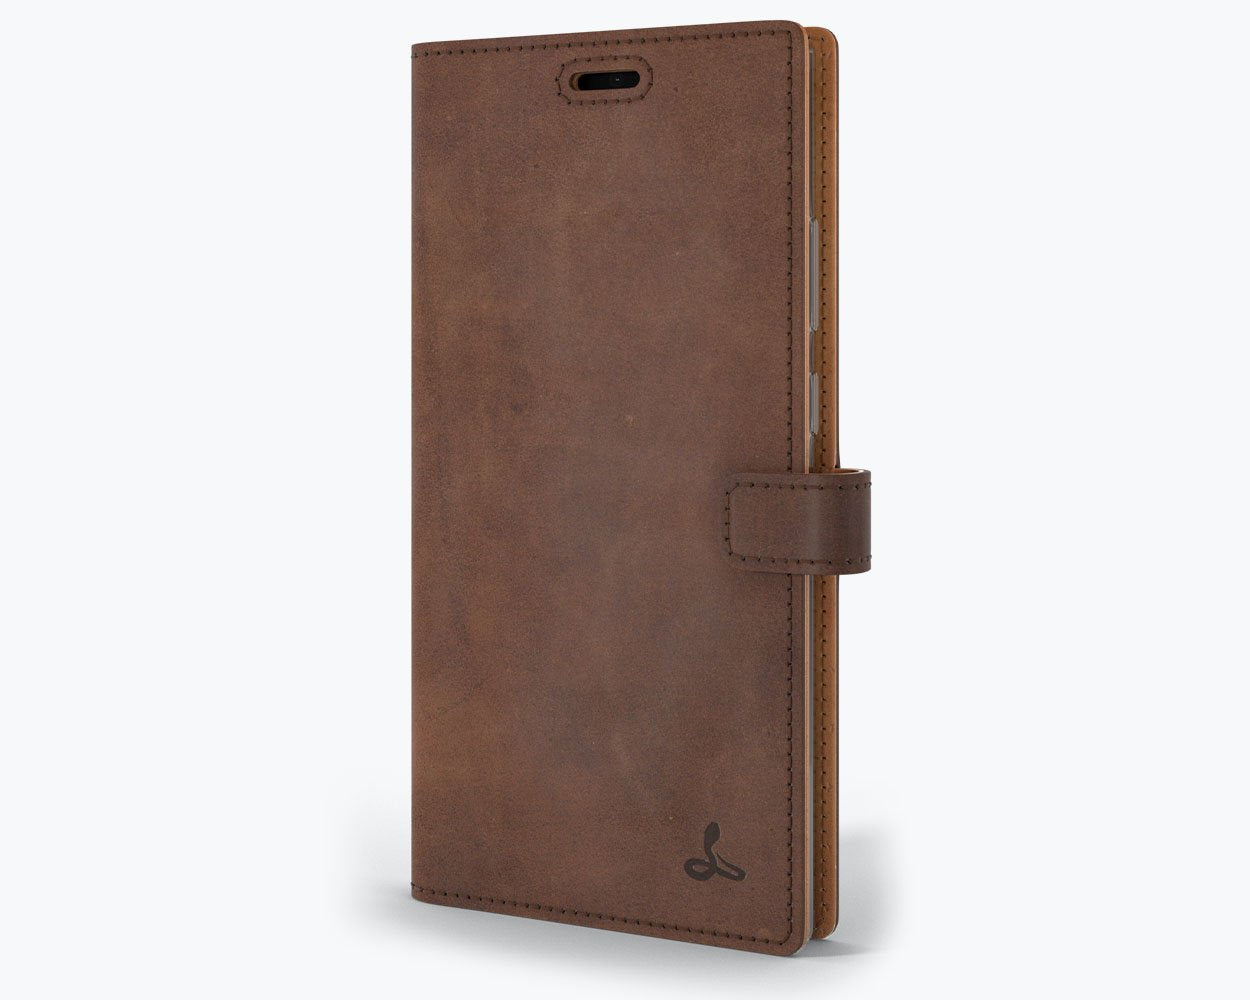 Vintage Leather Wallet - Samsung Galaxy Note 20 Ultra